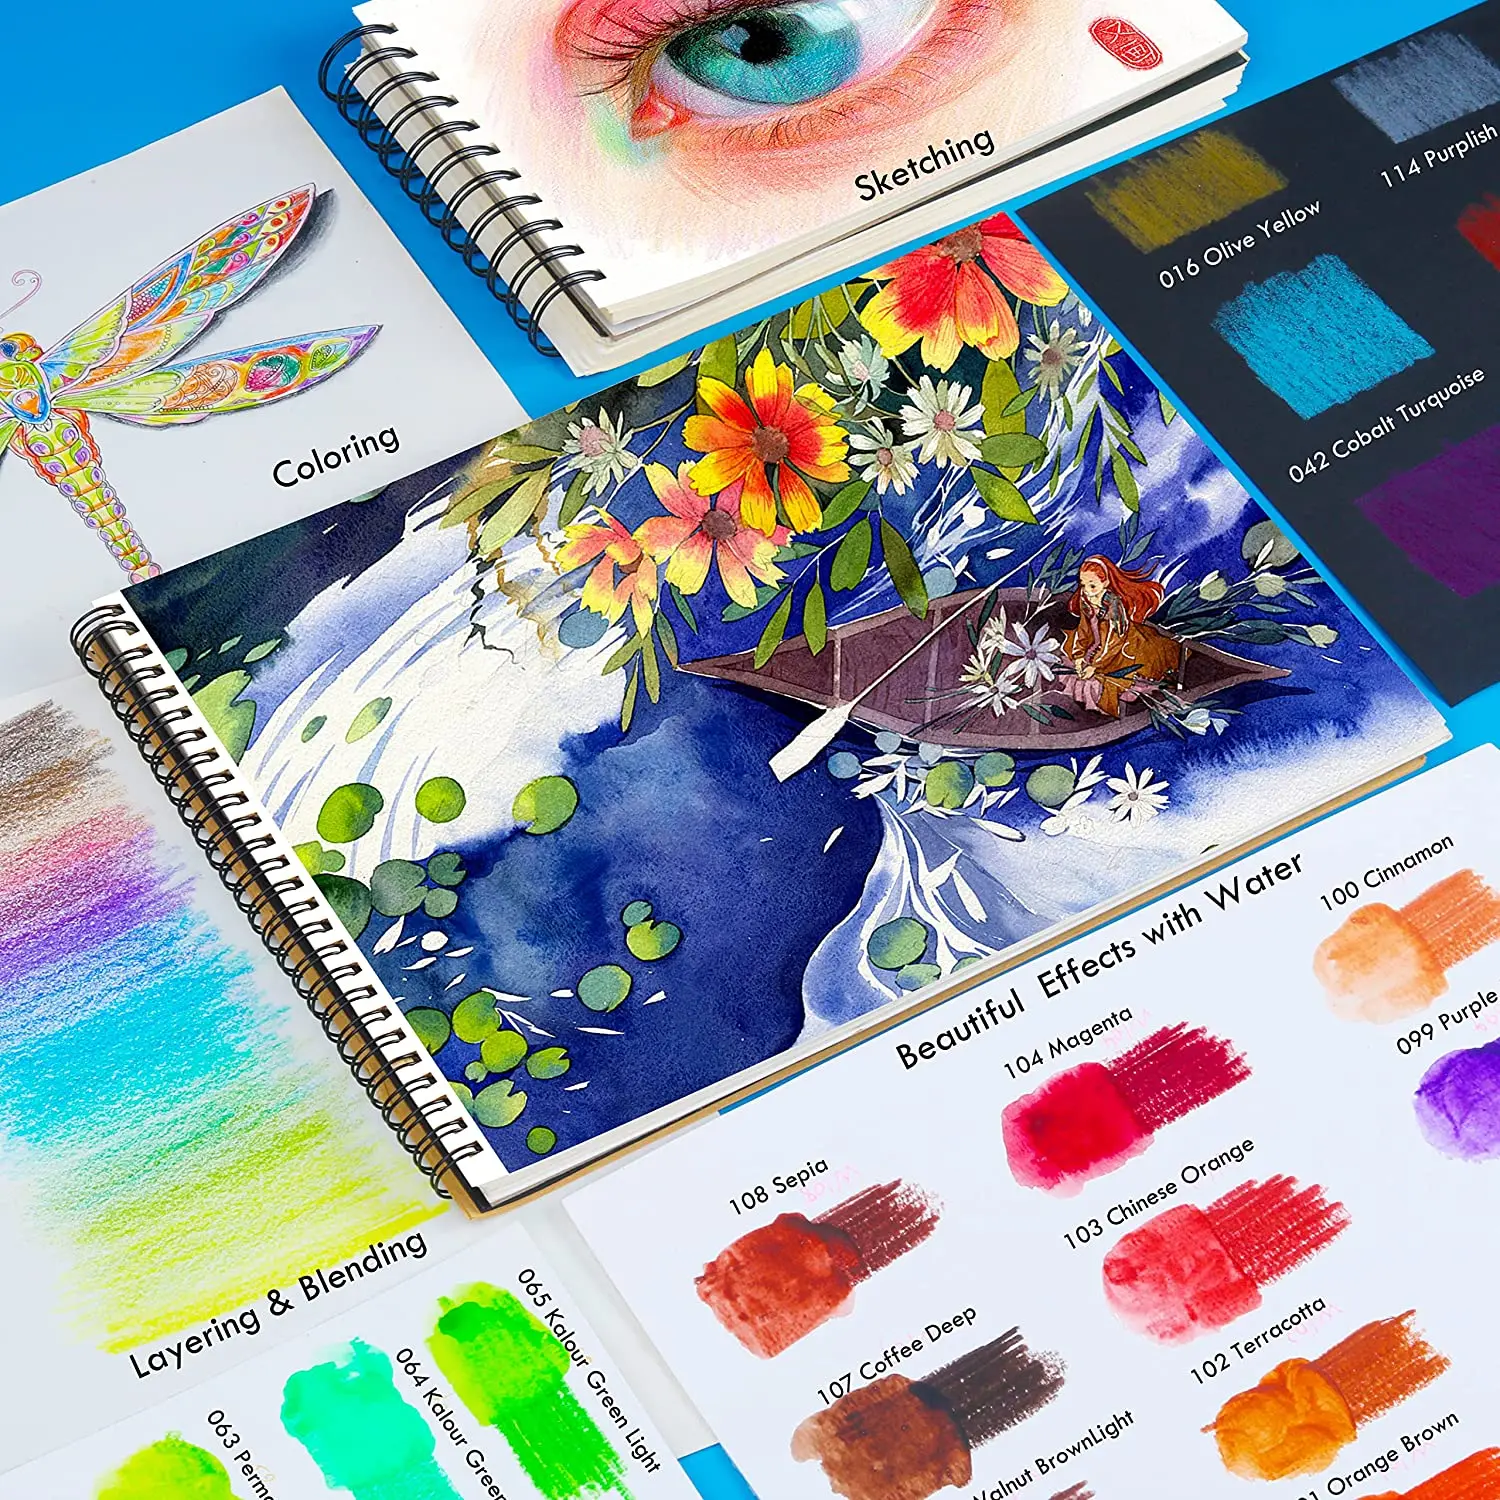 https://ae01.alicdn.com/kf/Ae375b3232a2d465aa4d37a5f28b611d33/120Colors-Premium-Watercolor-Pencils-Set-with-Brush-Pen-Water-soluble-Colored-Pencils-Portable-Case-for-Beginner.jpg